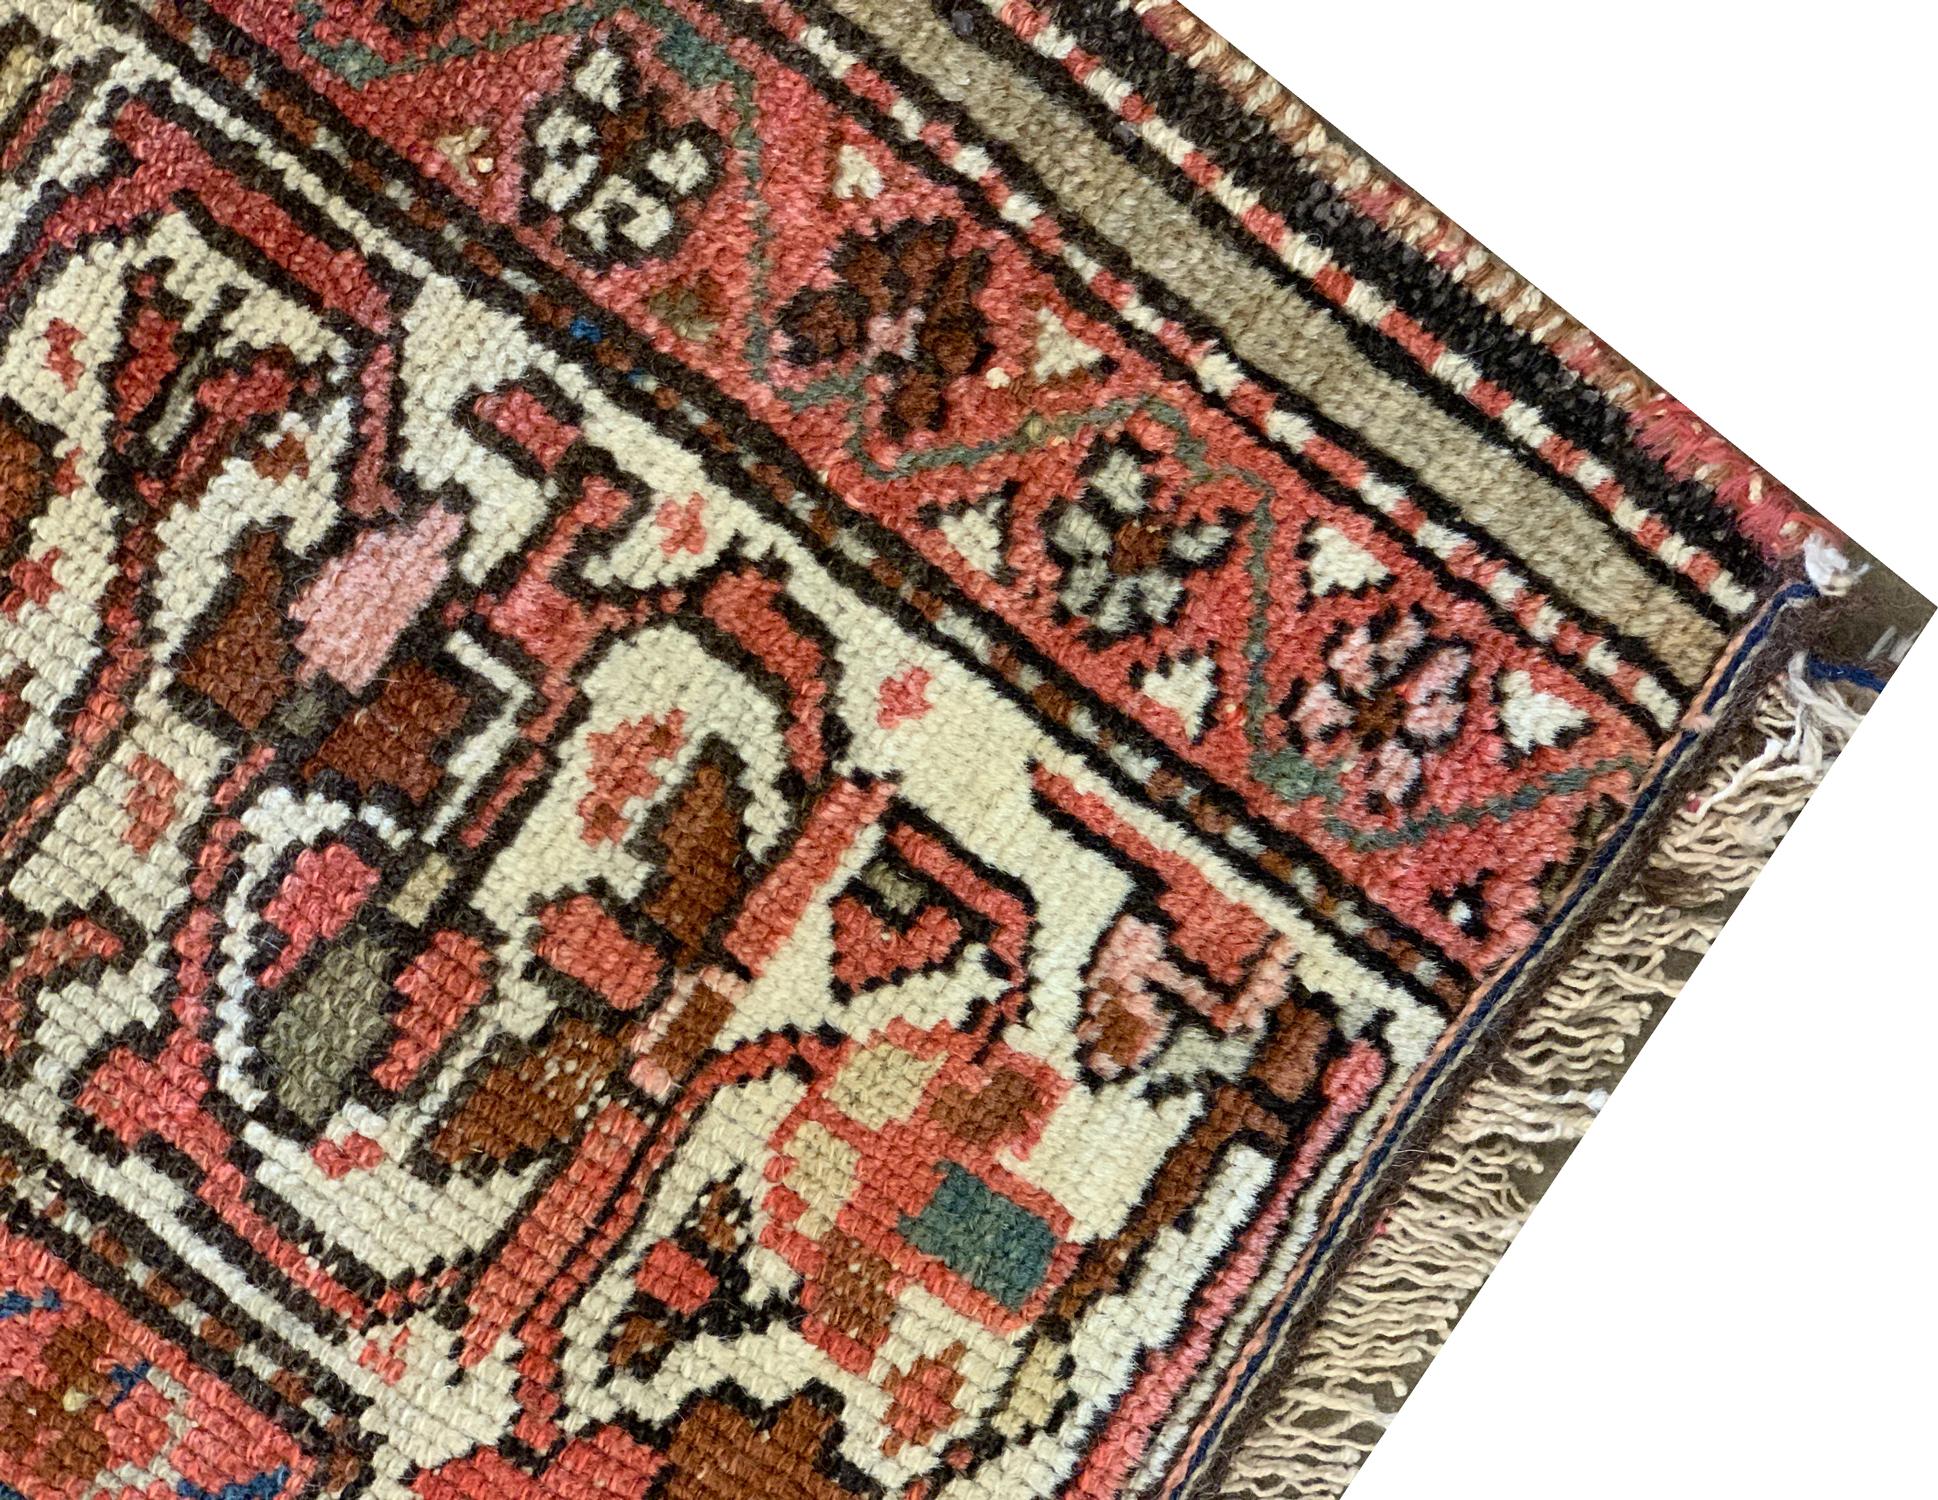 Vegetable Dyed Antique Rugs Caucasian Wool Area Paisley Tradition Oriental Carpet Rug For Sale